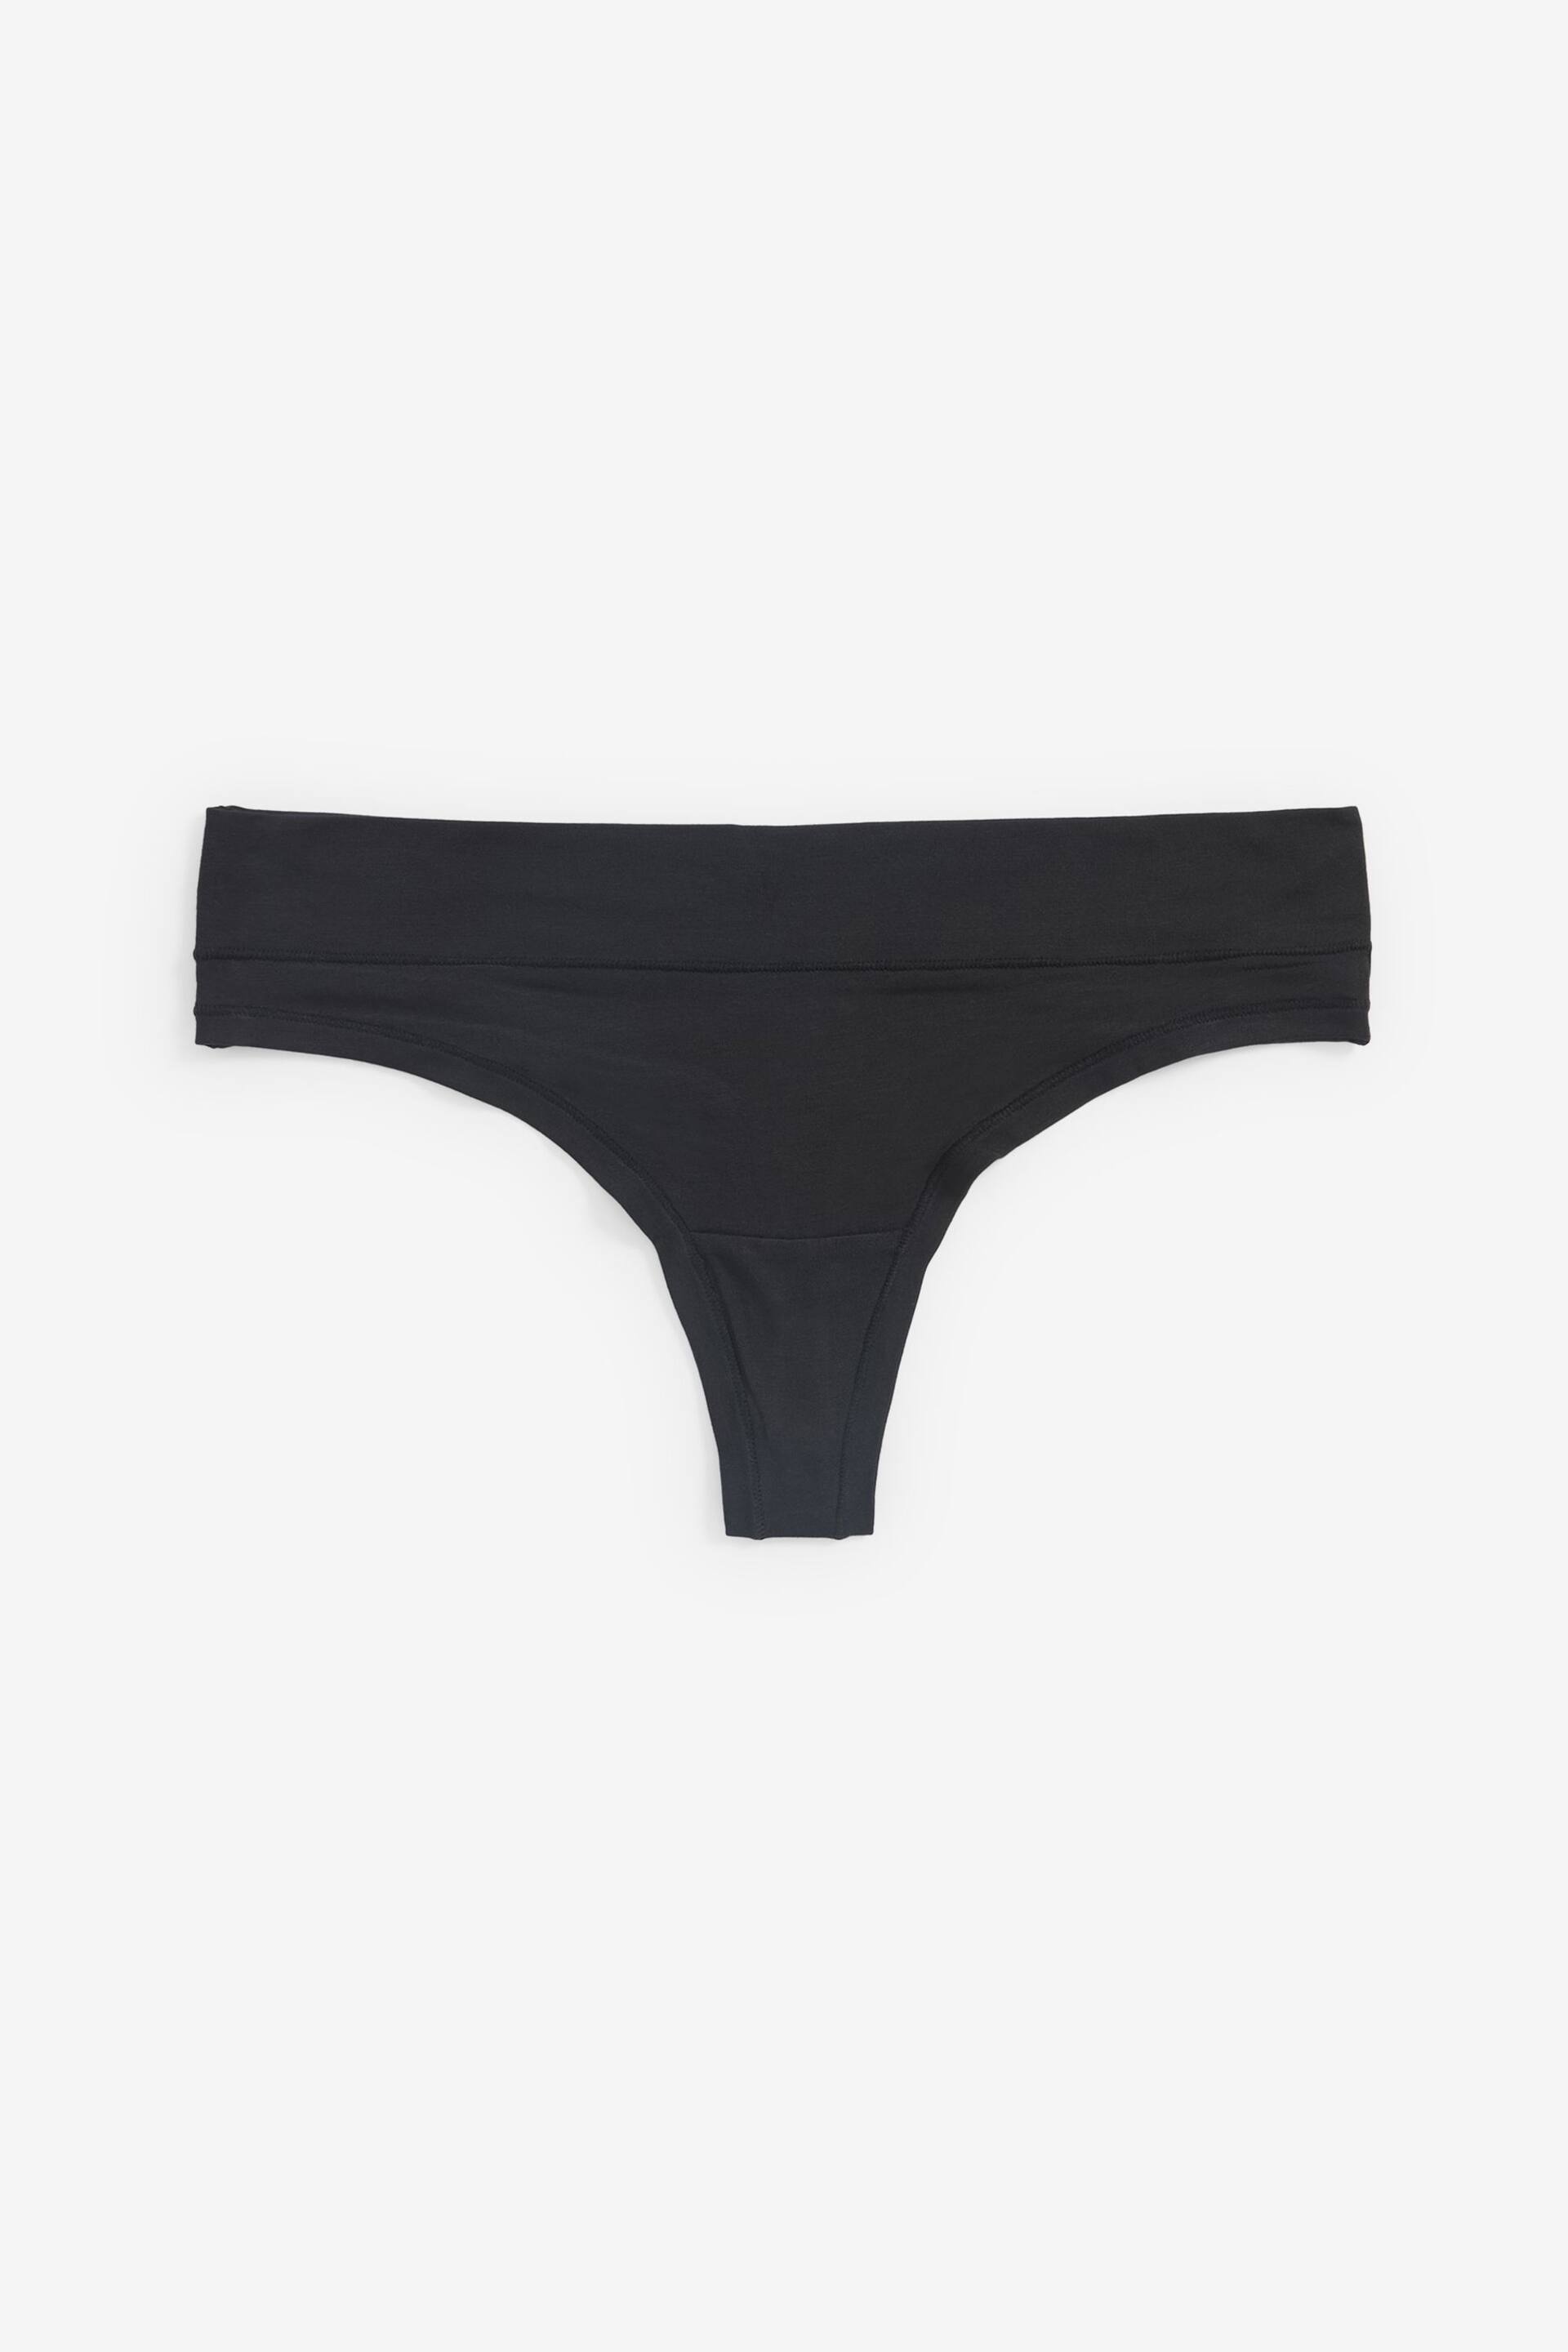 Black Thong Forever Comfort Knickers - Image 4 of 4